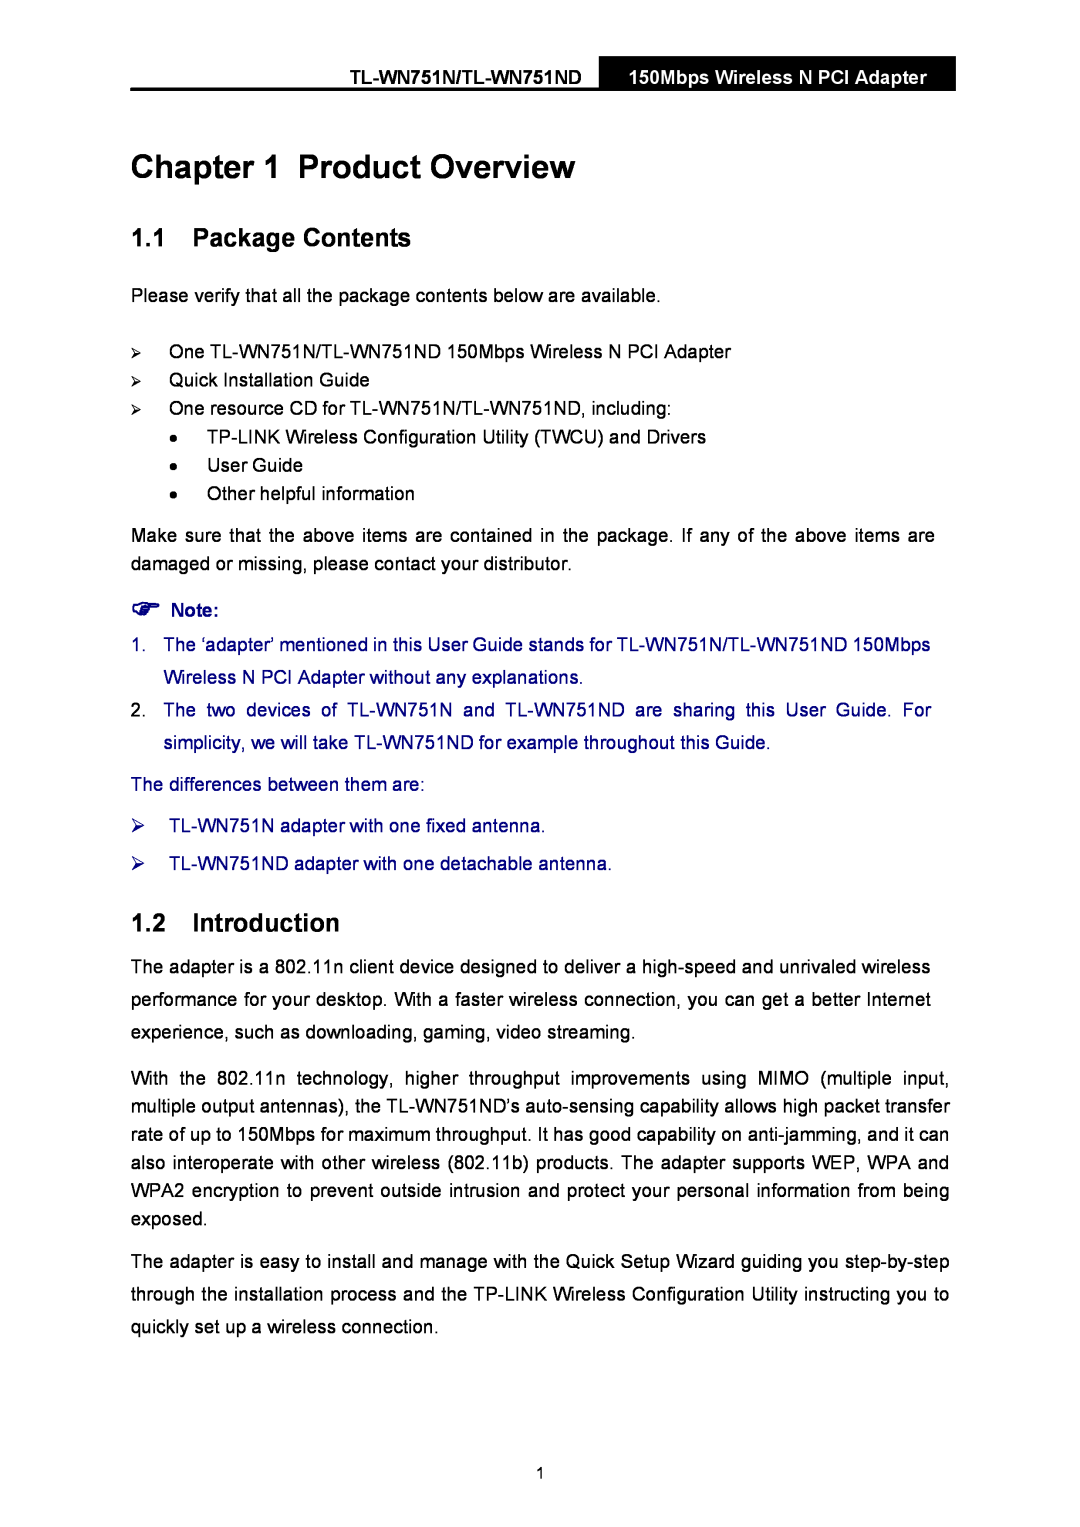 TP-Link manual Product Overview, Package Contents, Introduction, TL-WN751N/TL-WN751ND, 150Mbps Wireless N PCI Adapter 